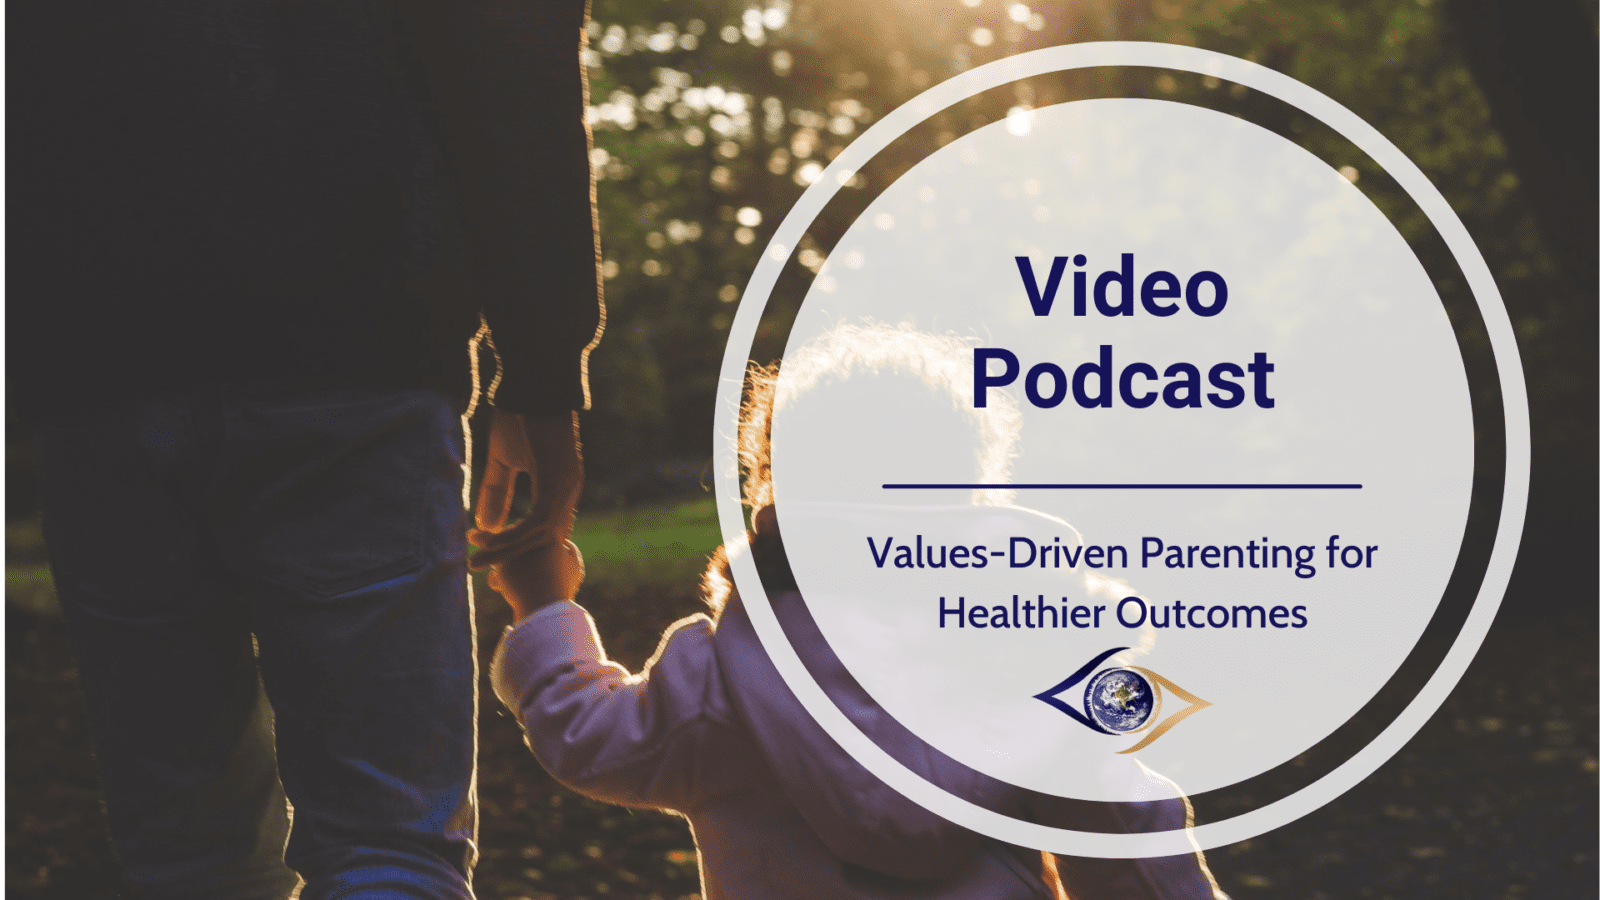 Values-Driven Parenting for Healthier Outcomes